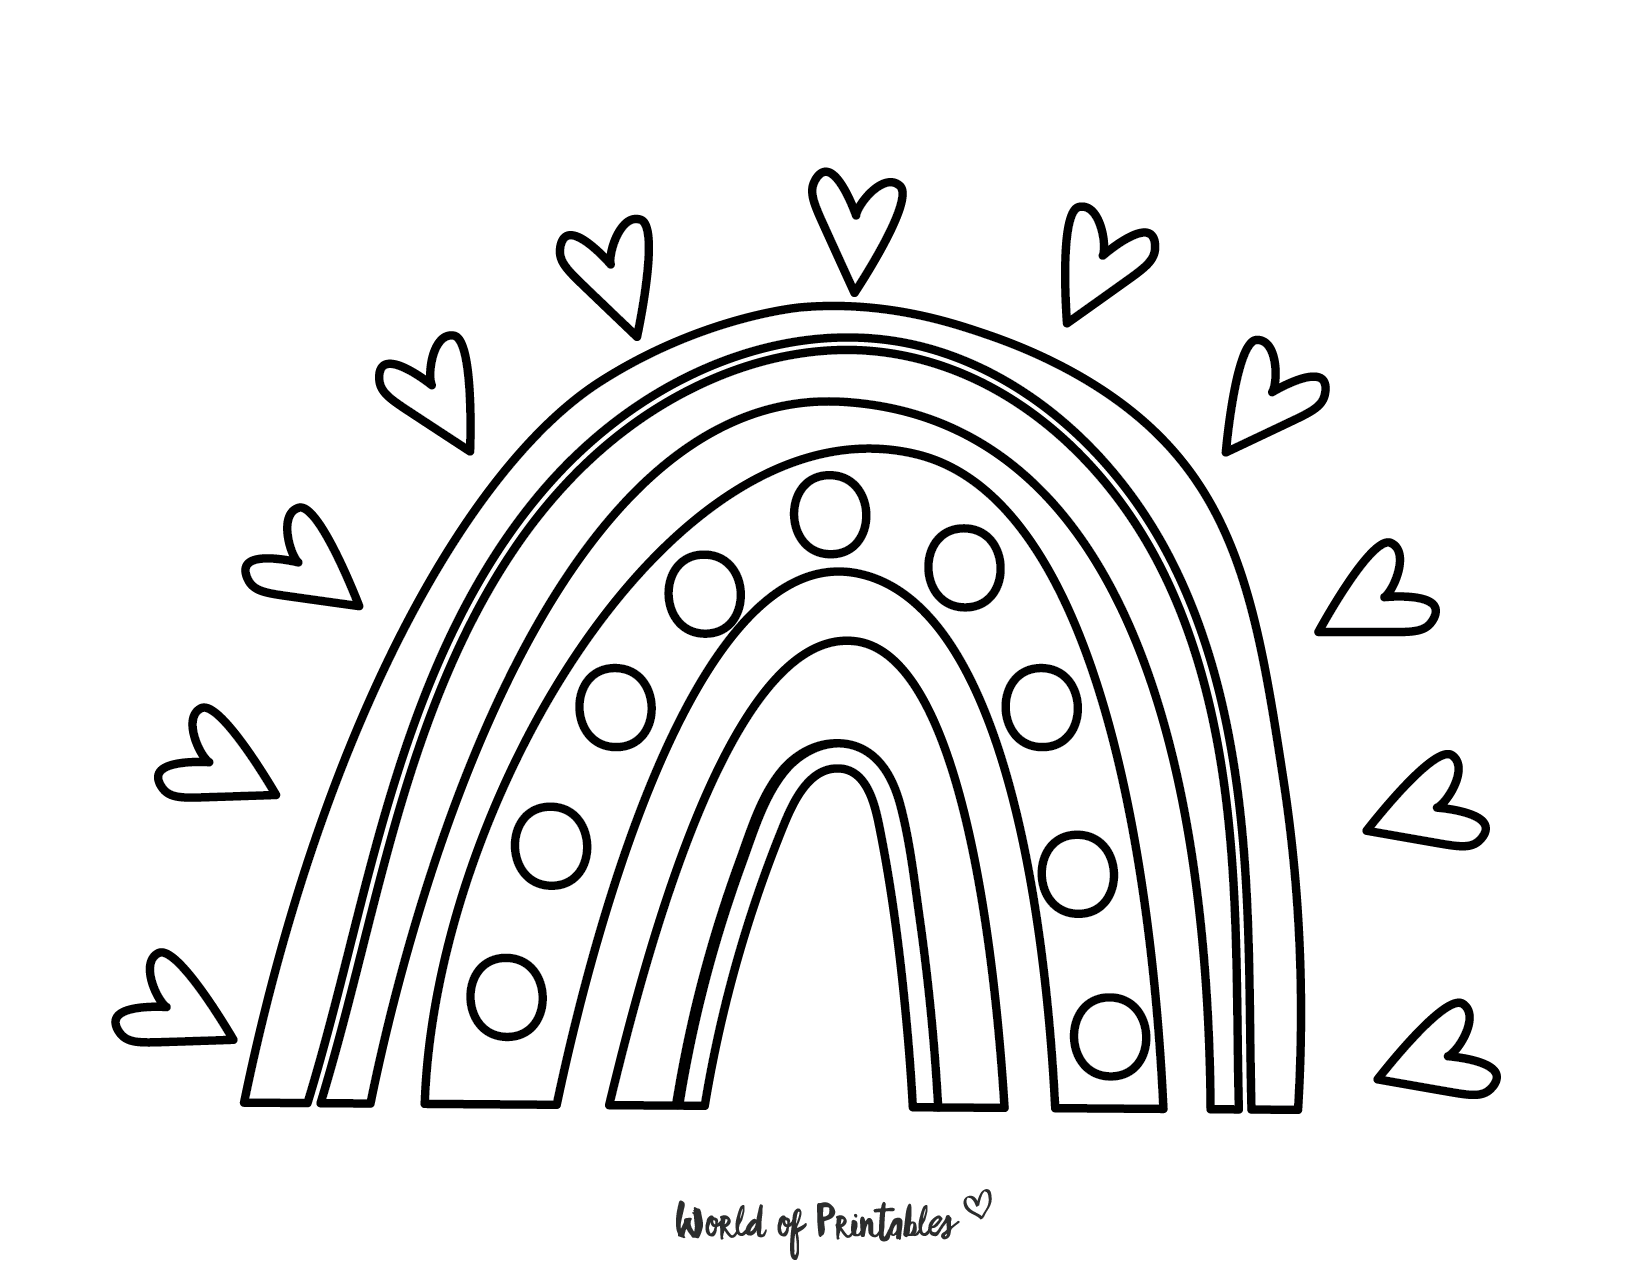 50 Best Rainbow Coloring Pages To Brighten Your Day - World of Printables